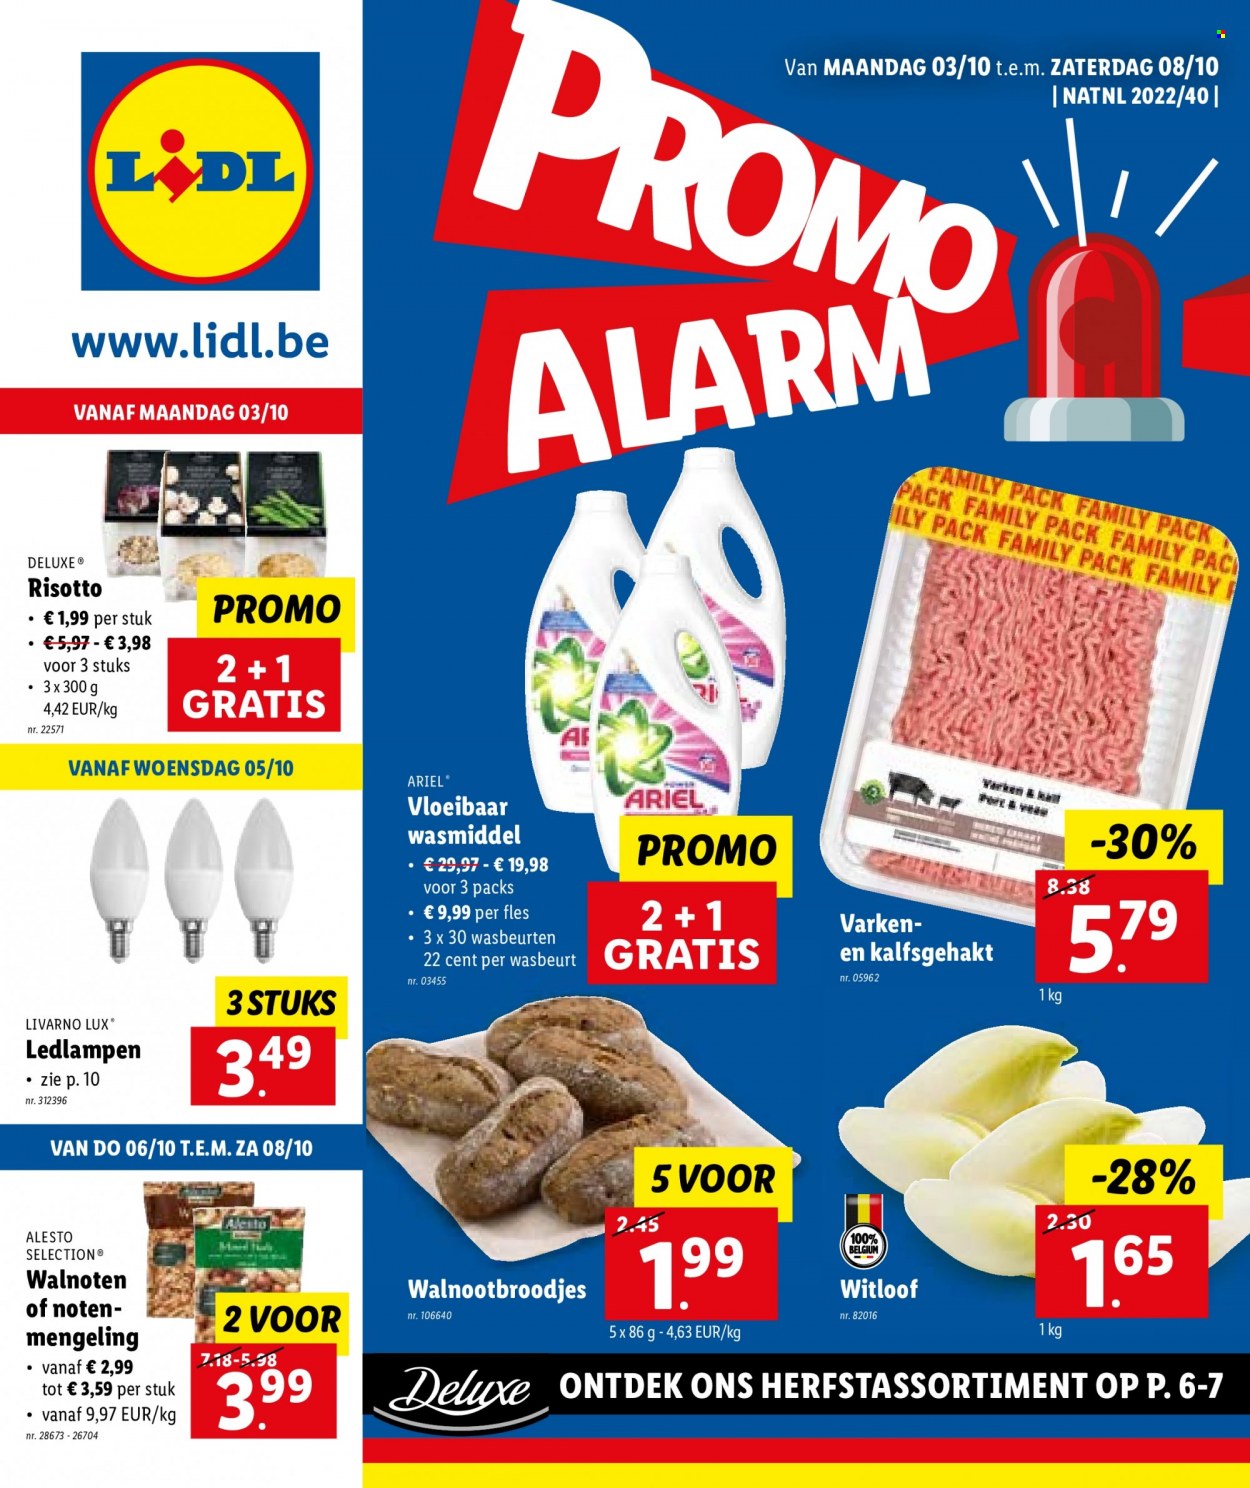 Catalogue Lidl - 3.10.2022 - 8.10.2022. Page 1.